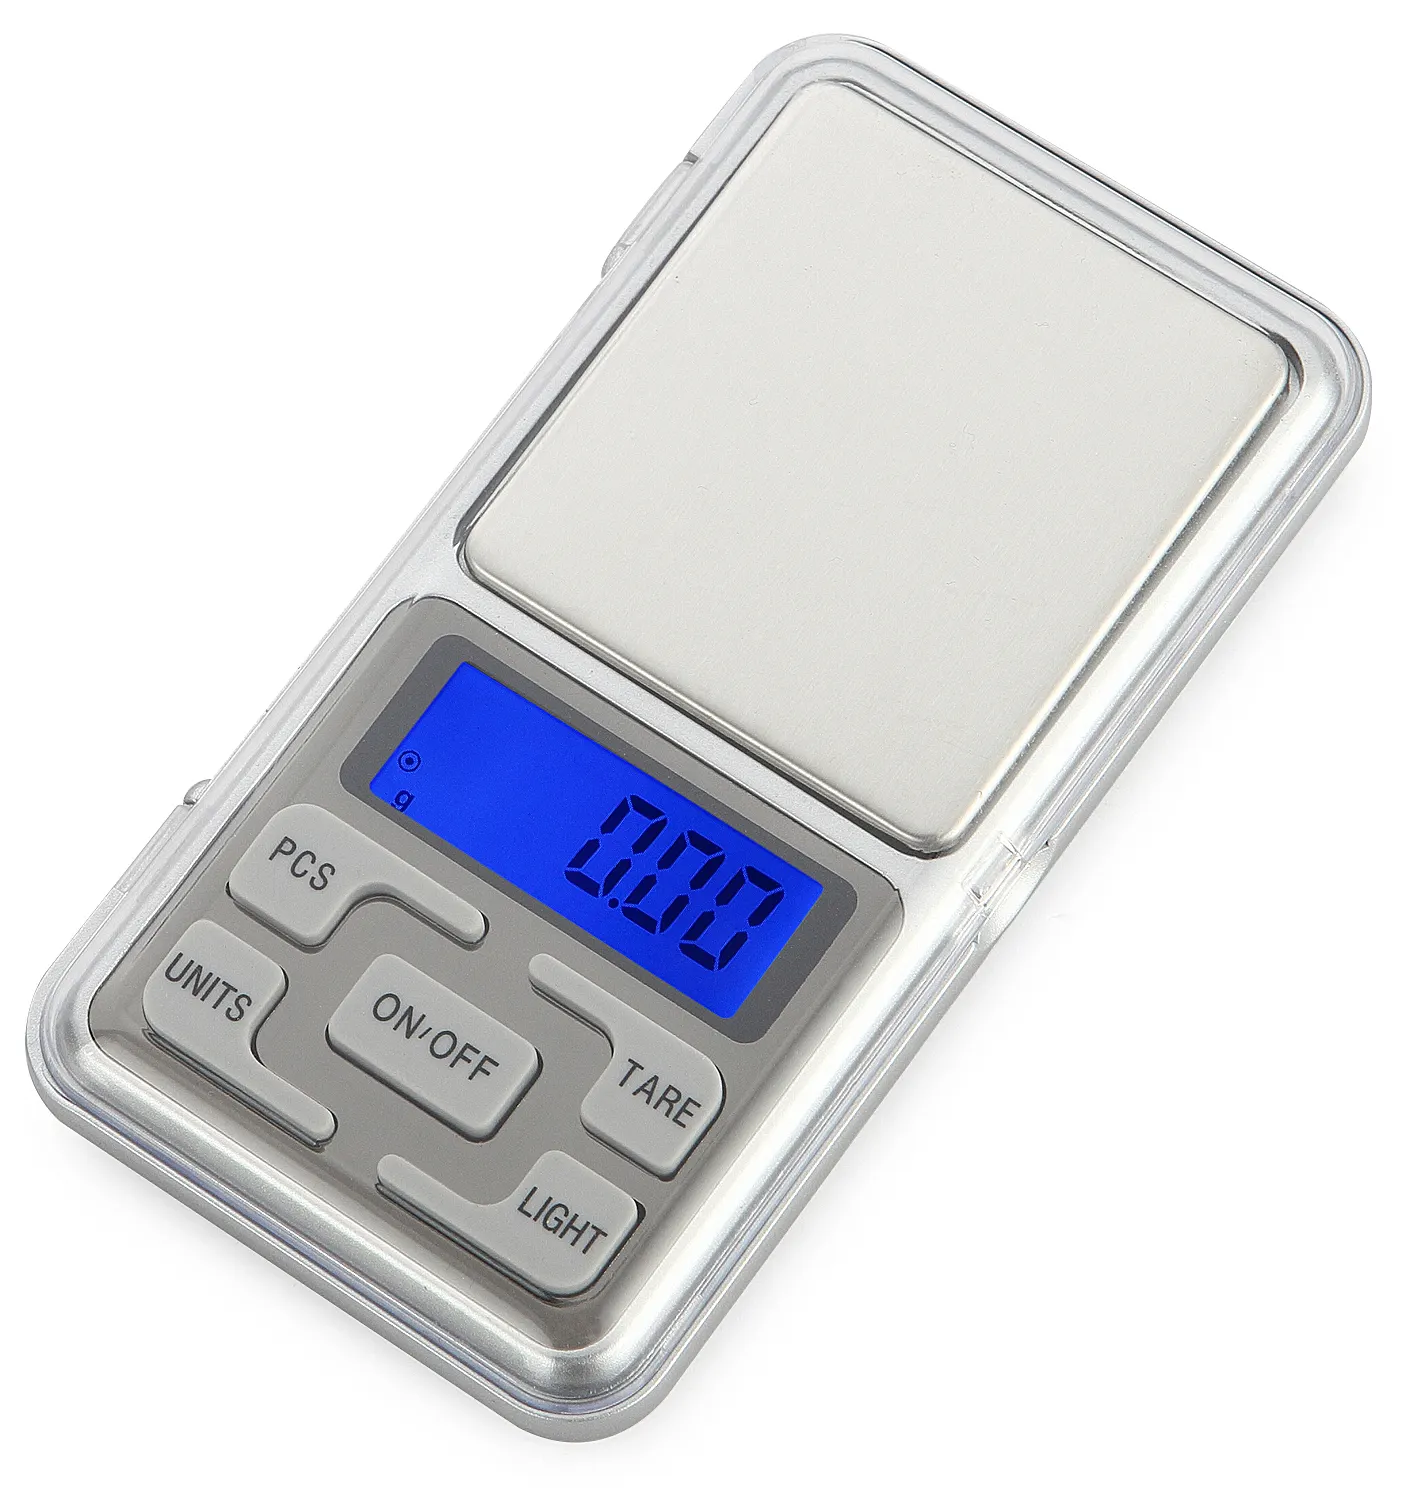 MH Series Hot Sale Amazon Products 500g 0.1g Electronics Weighing Scale Pocket Scale